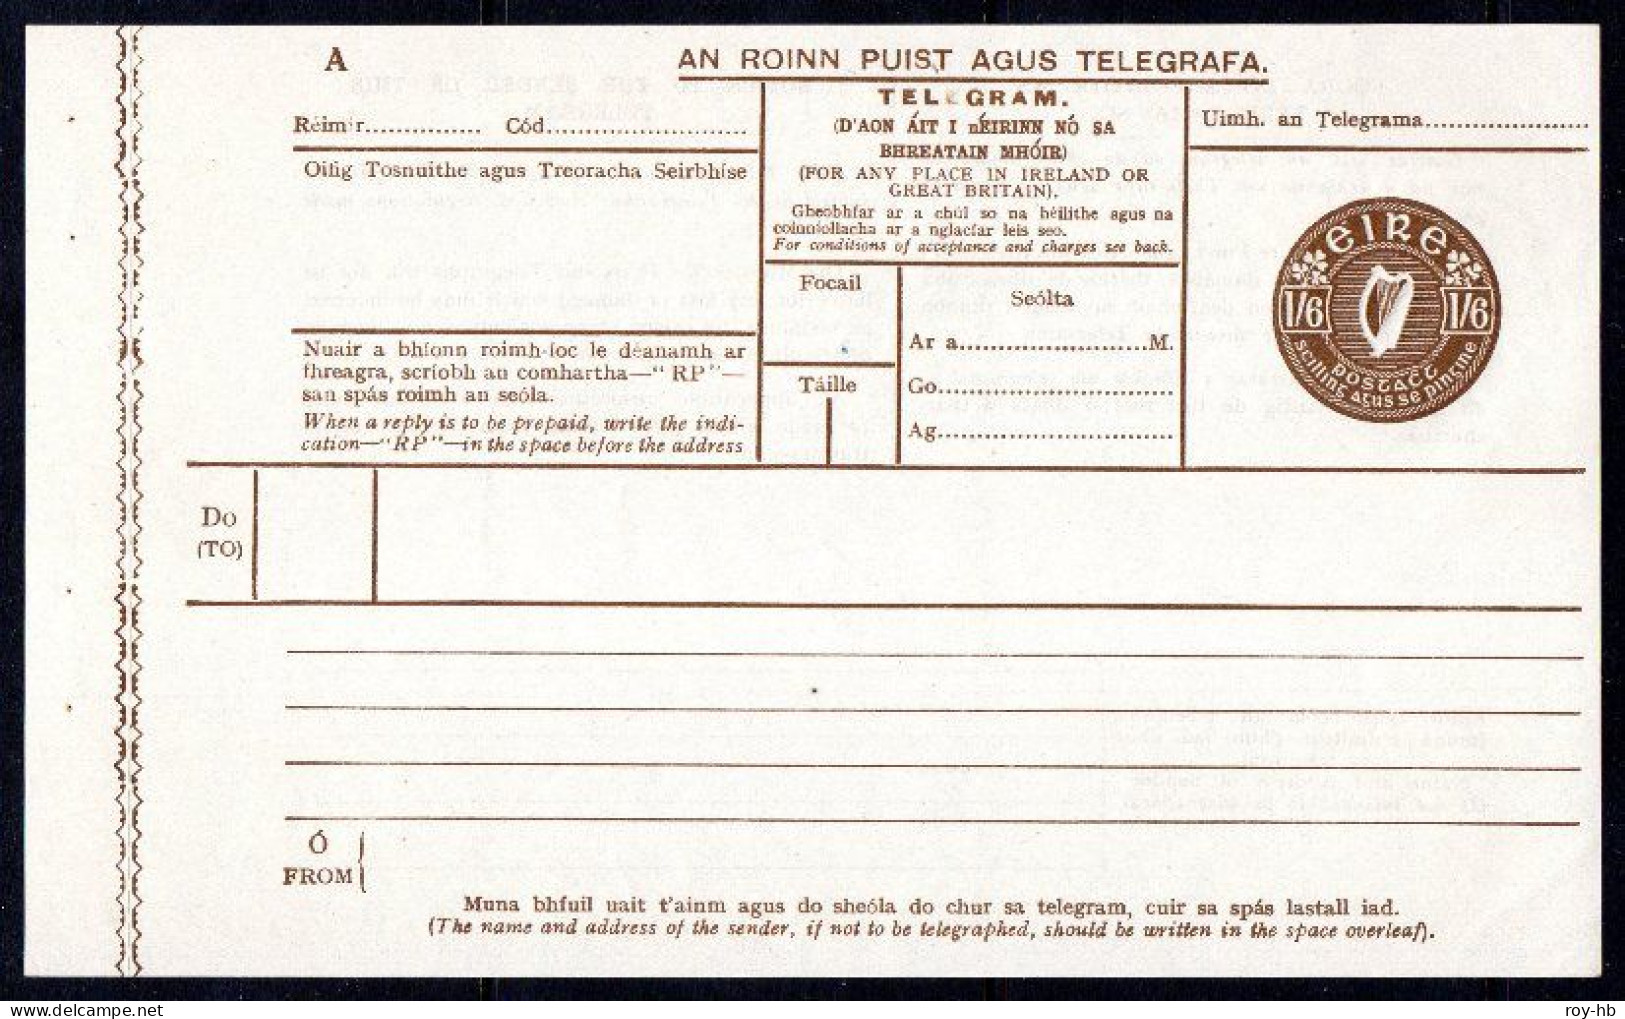 Telegram Form, 1929 1/6 "all Brown" With Original Interleaving Showing A Clear Albino Impression Of The Indicia. - Postal Stationery